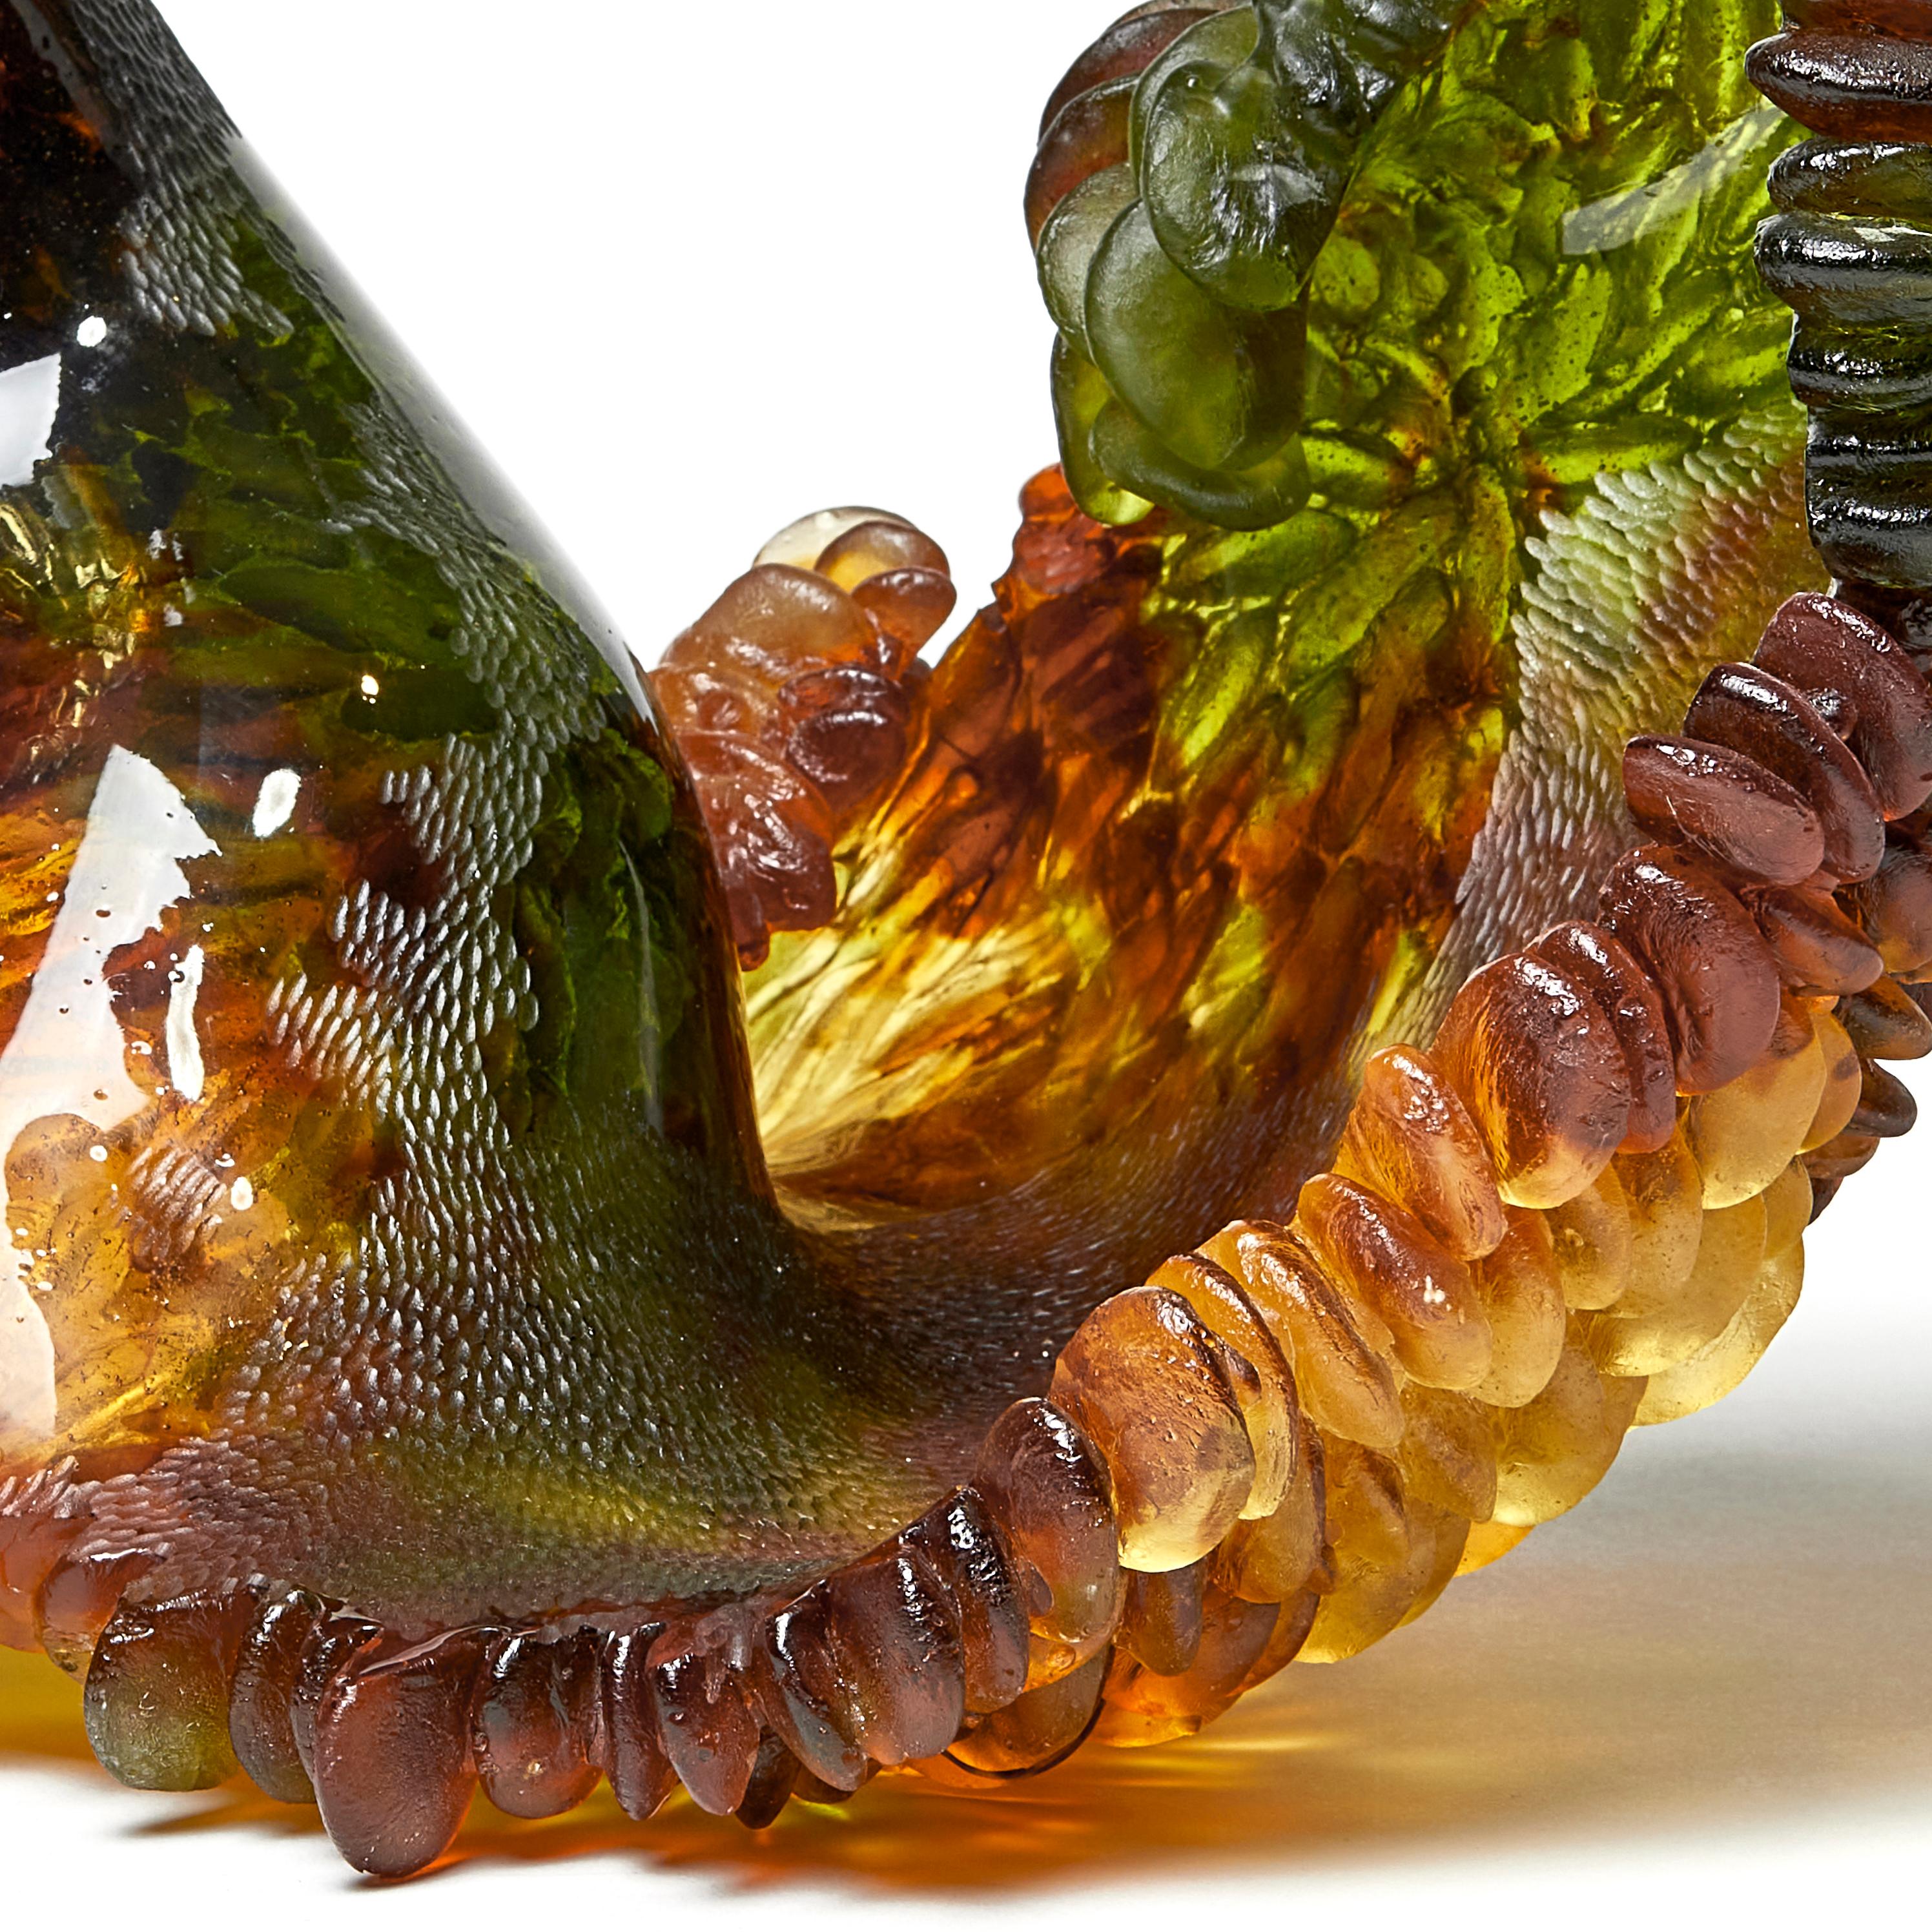 British Autumn Cherry, Unique Glass Sculpture in Green and Amber by Nina Casson McGarva